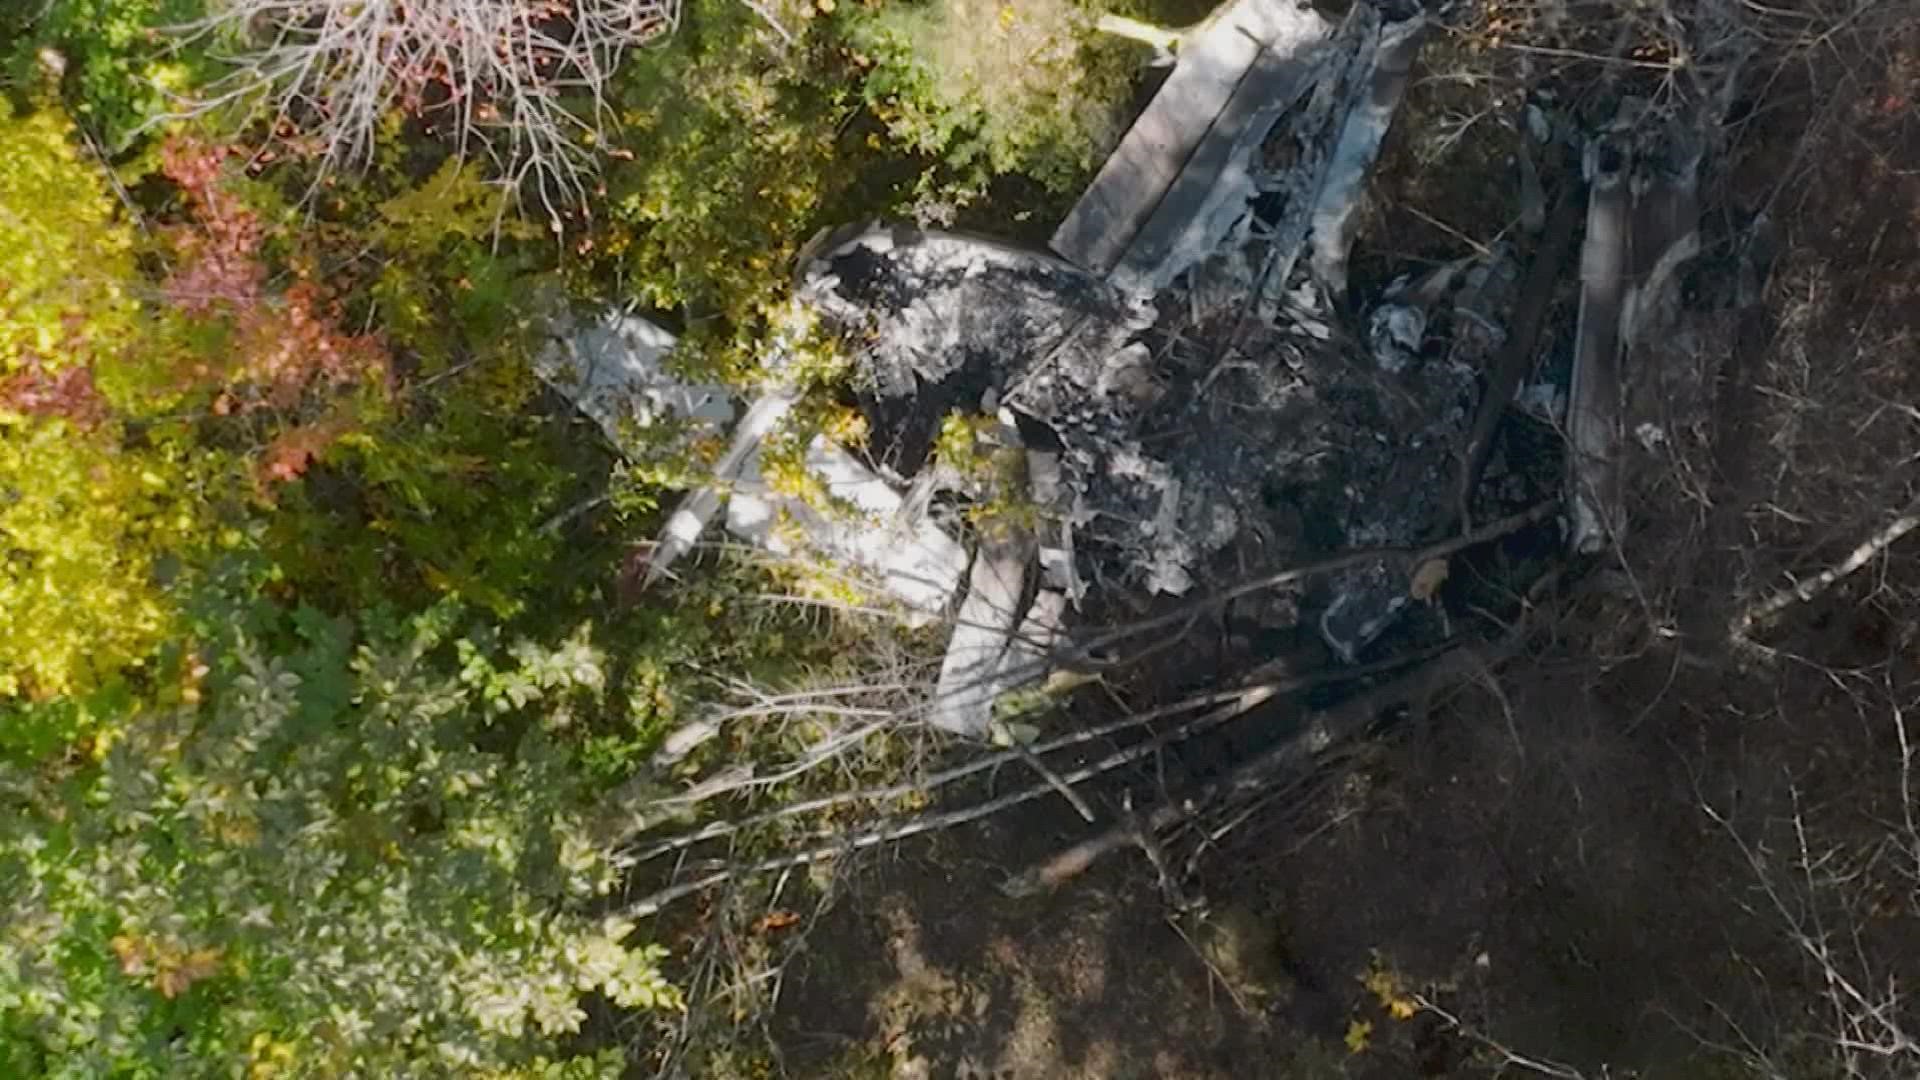 The National Transportation Safety Board has released new information about a plane crash in Arundel that killed two people.